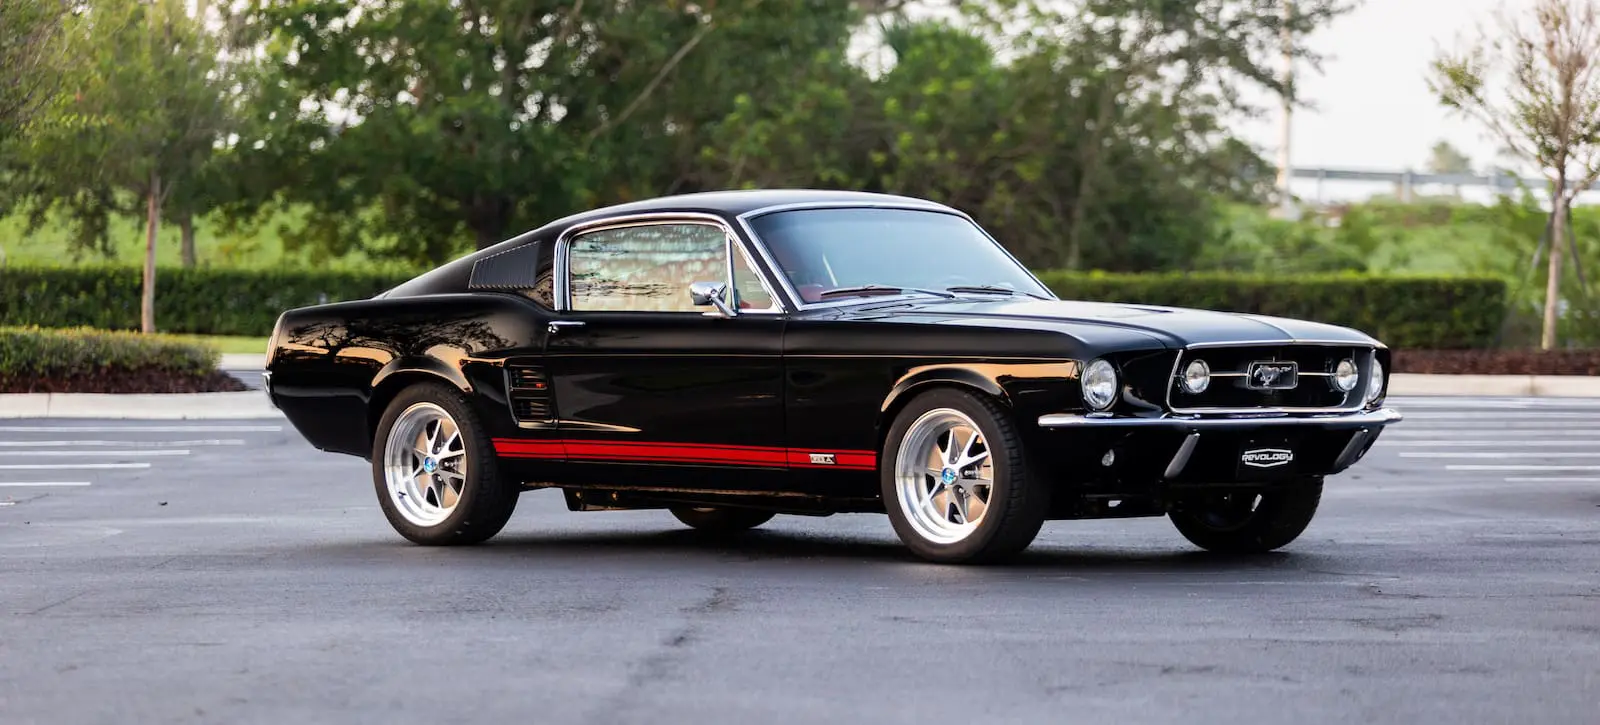 A rare view of a black 1967 Mustang GT / GTA 2+2 Fastback with red stripes.